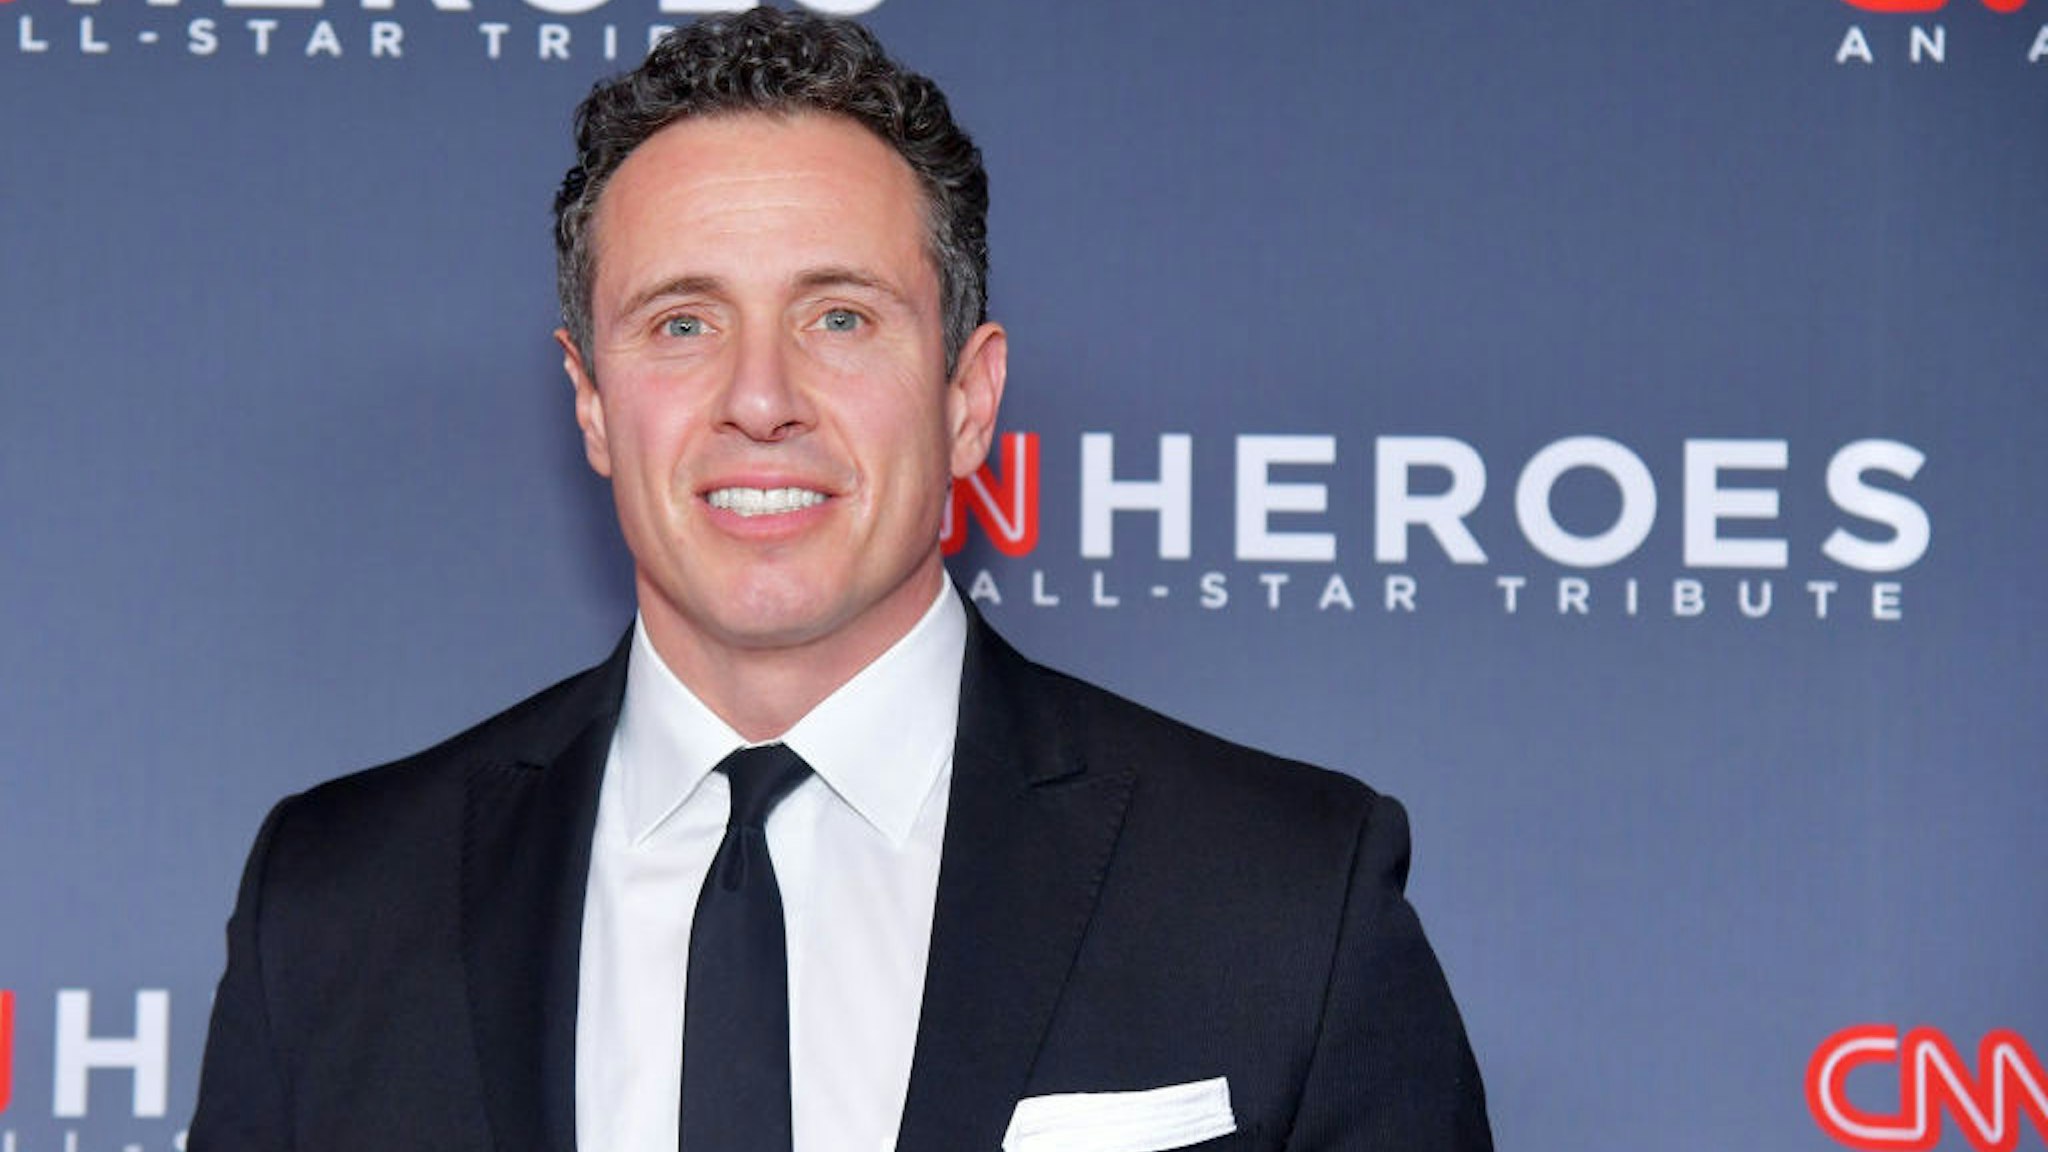 NEW YORK, NY - DECEMBER 09: Chris Cuomo attends the 12th Annual CNN Heroes: An All-Star Tribute at American Museum of Natural History on December 9, 2018 in New York City. (Photo by Michael Loccisano/Getty Images for CNN)